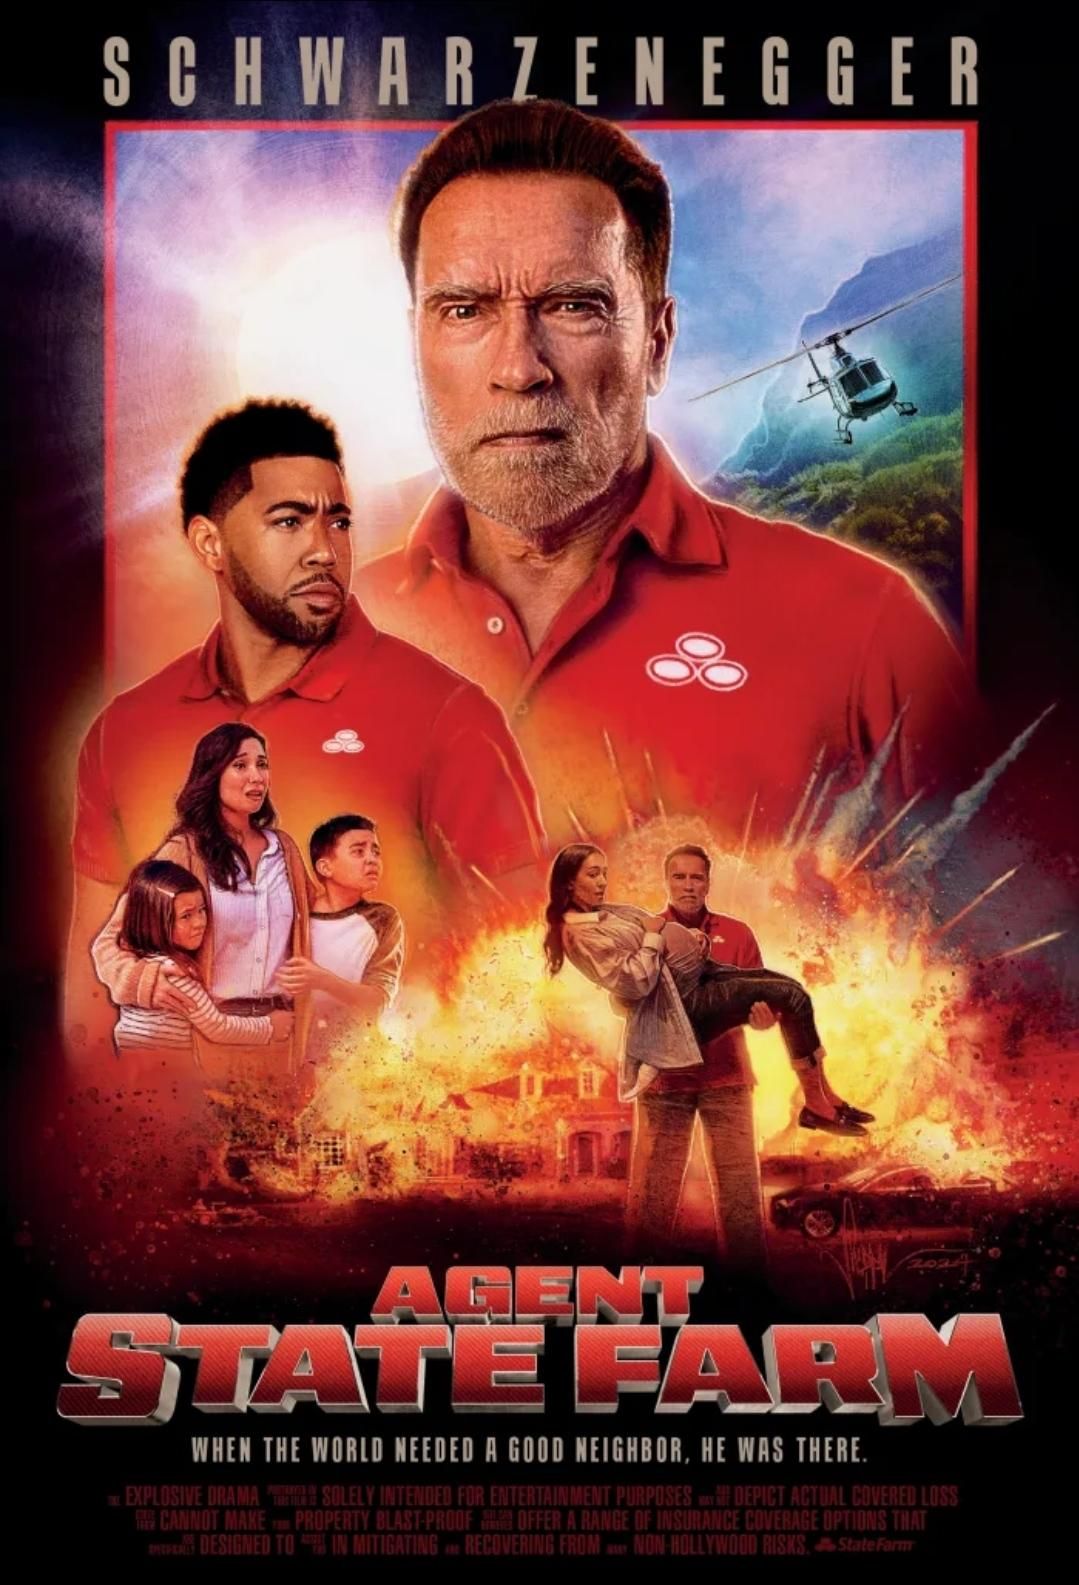 SCHWARZENEGGER
STATE FARM
WHEN THE WORLD NEEDED A GOOD NEIGHBOR, HE WAS THERE.
EXPLOSIVE DRAMA SOLELY INTENDED FOR ENTERTAINMENT PURPOSES DEPICT ACTUAL COVERED LOSS
CANNOT MAKE PROPERTY BLAST-PROOF OFFER A RANGE OF INSURANCE COVERAGE OPTIONS THAT
DESIGNED TO IN MITIGATING RECOVERING FROM NON-HOLLYWOOD RISKS, State Farm